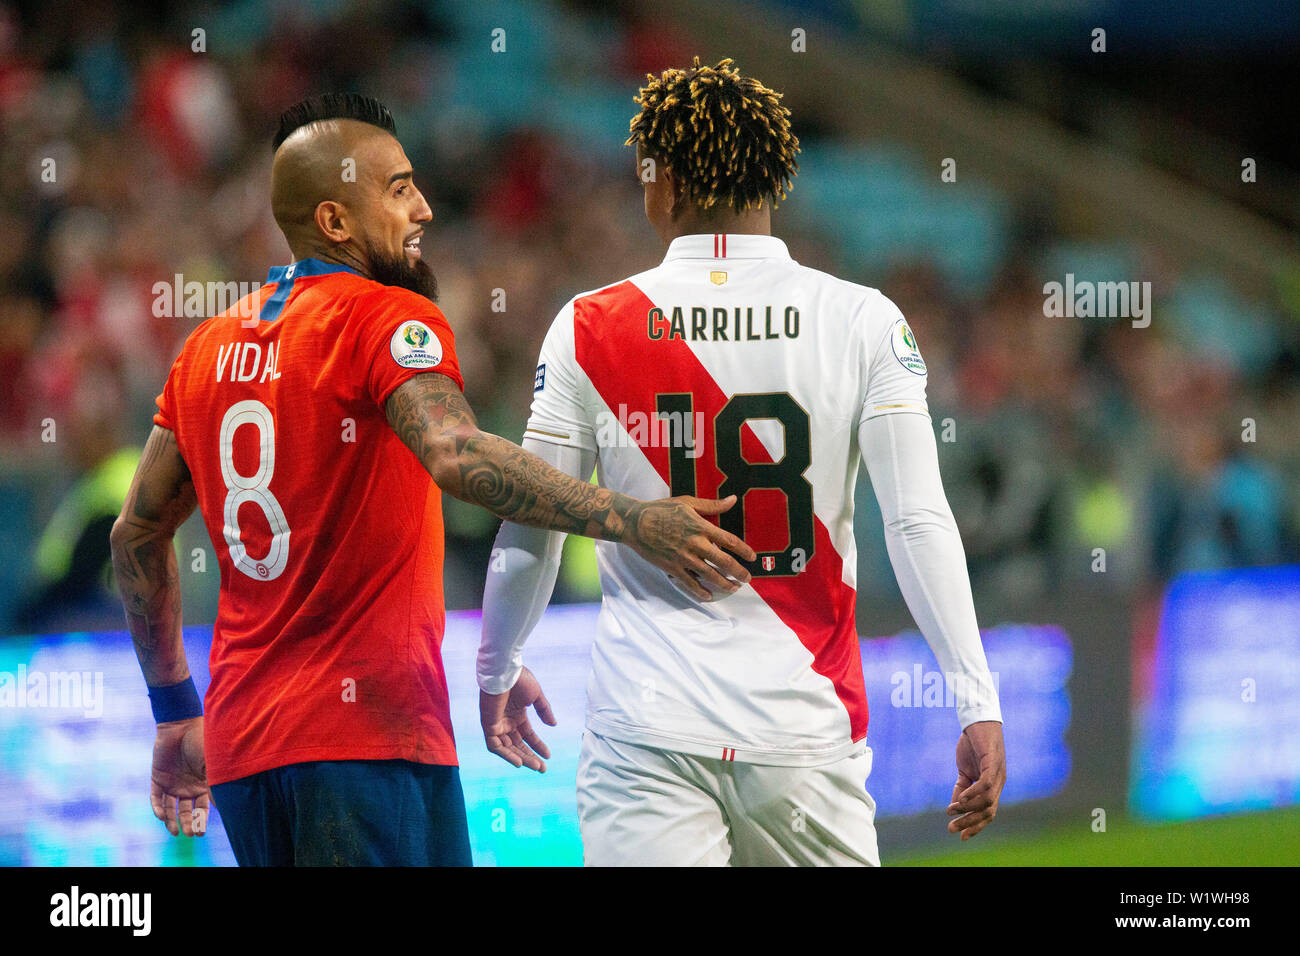 Porto Alegre, Brazil. 03rd July, 2019. André Carrillo Diaz is bidding during the match between Chile and Peru, valid for the semifinal of Copa America 2019, held this Wednesday (03) at the Arena of Grêmio, in Porto Alegre, RS. Credit: Raul Pereira/FotoArena/Alamy Live News Stock Photo